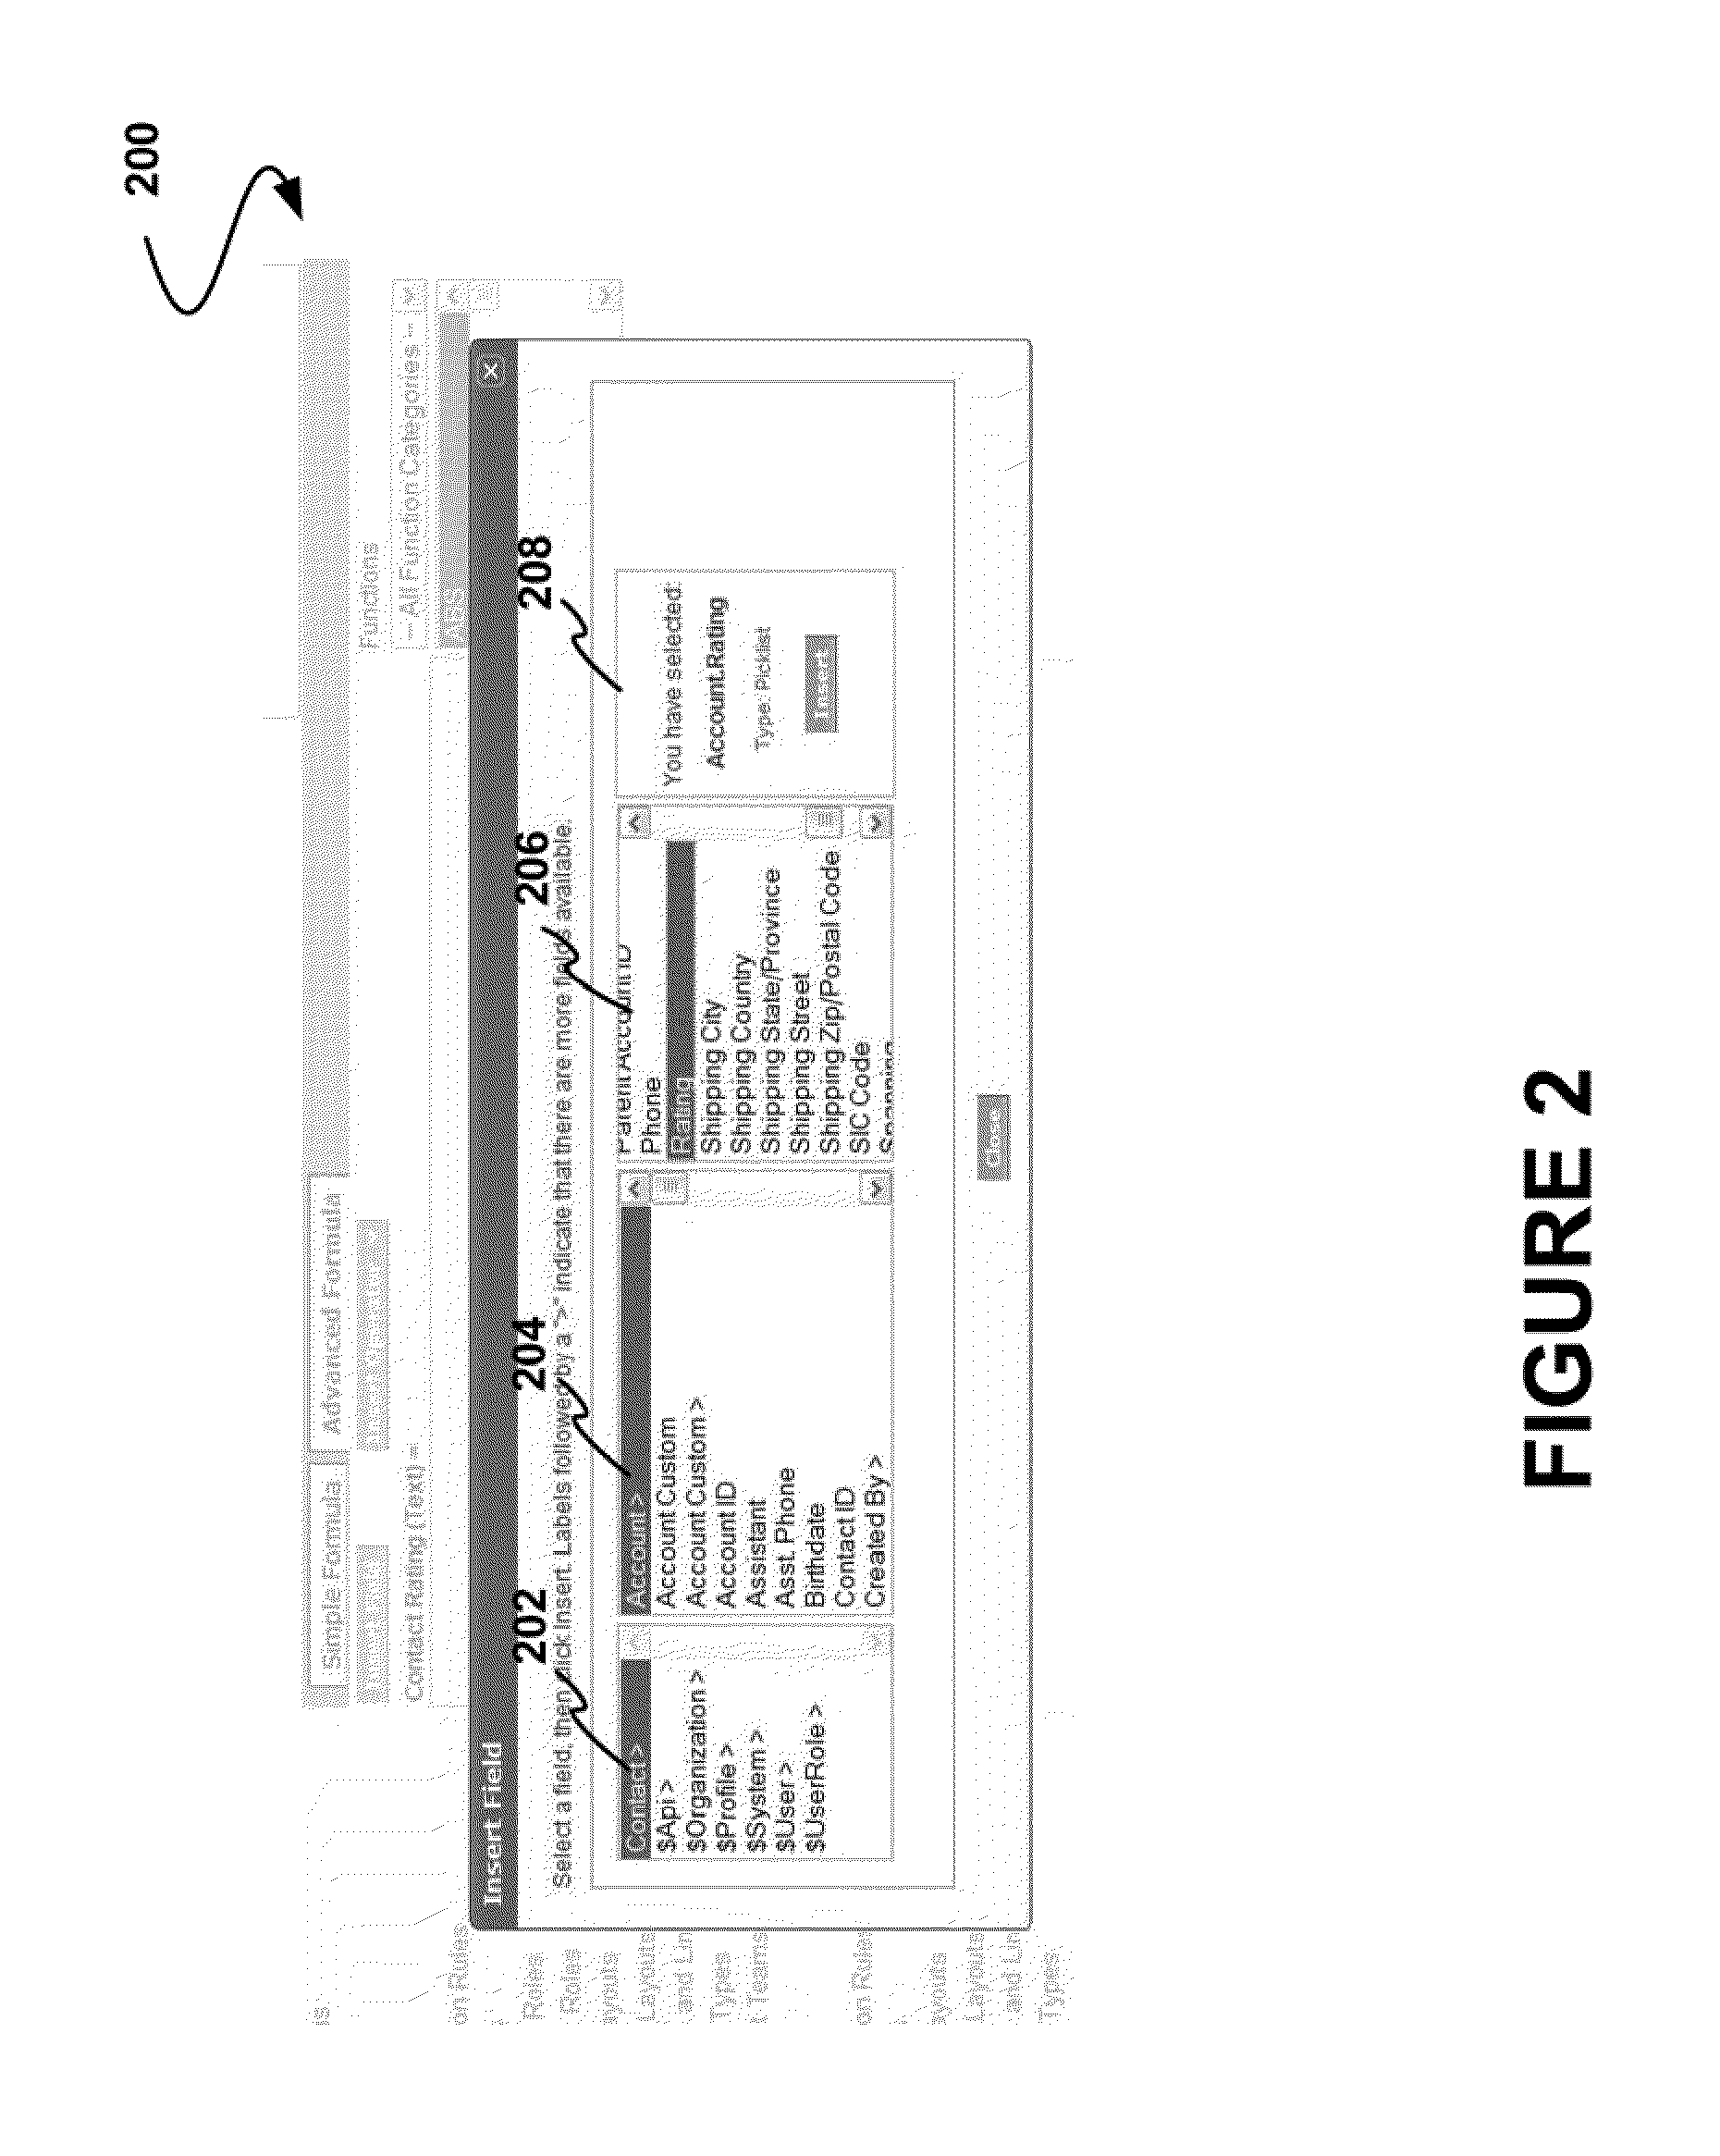 System, method and computer program product for storing a formula having first and second object fields